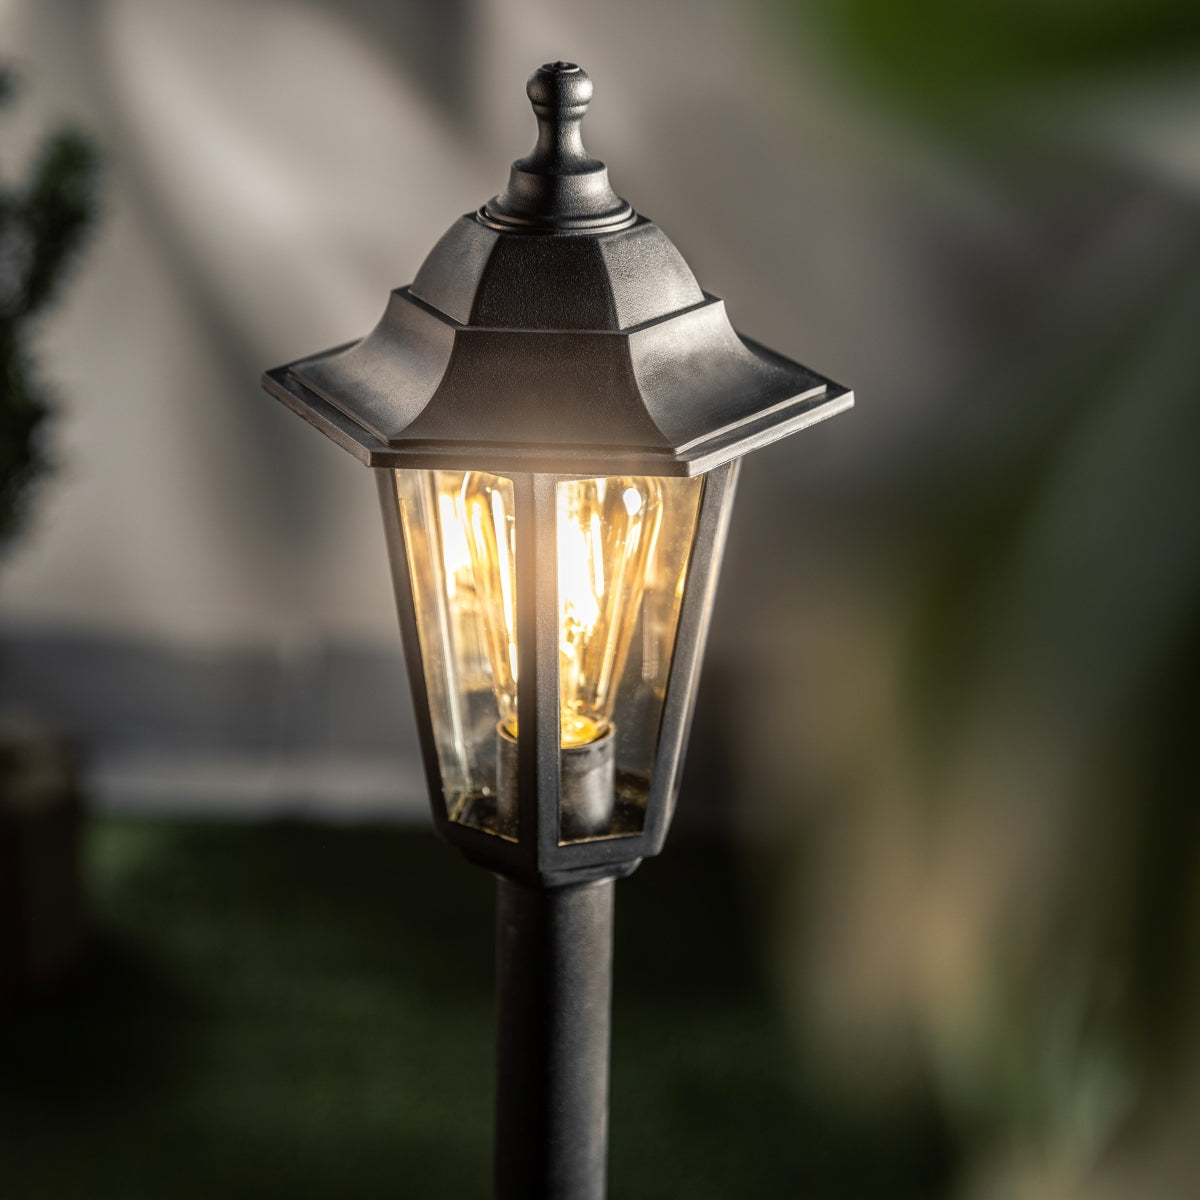 Our Yasmin adjustable lantern delivers on style and durability and is a smart choice for your exterior lighting. With its black polycarbonate construction teamed with clear polycarbonate panes, this lantern is hardwearing and rust and weatherproof. Built for life outdoors, it has an IP44 rating which means it can withstand the harshest of weather conditions. For sophisticated yet robust outdoor lighting, our Yasmin black outdoor traditional lantern is a strong contender.